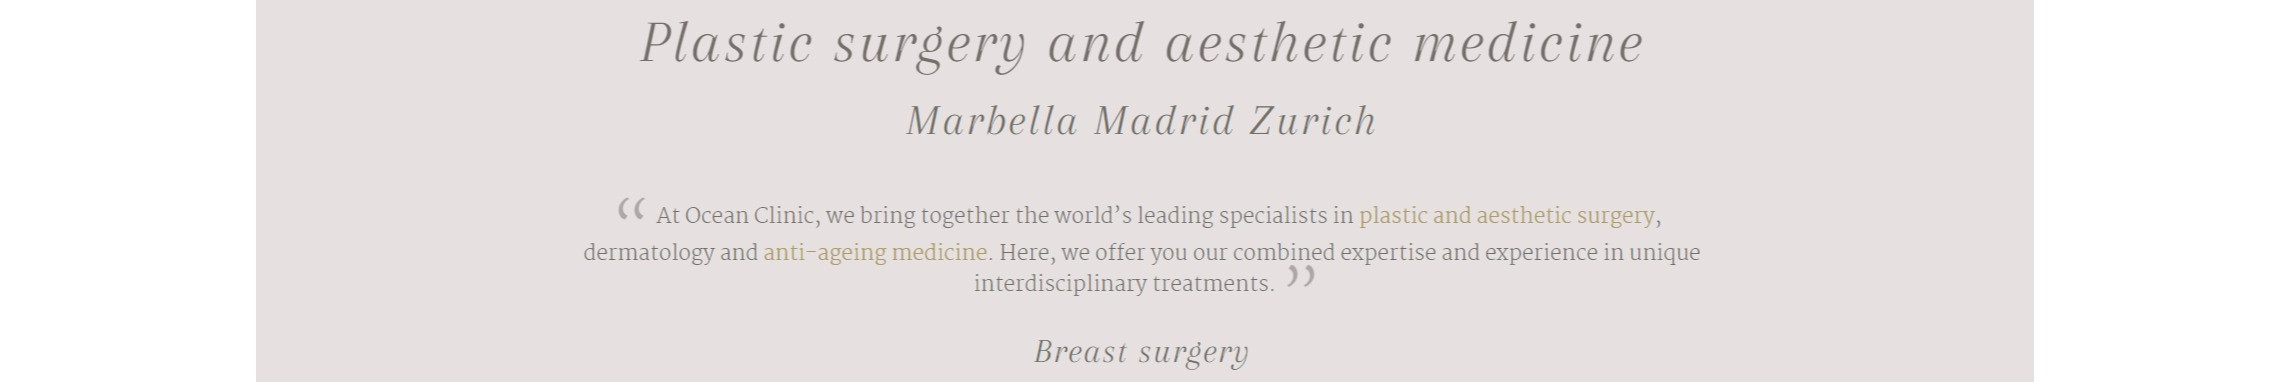 Cosmetic surgery and aesthetic medicine